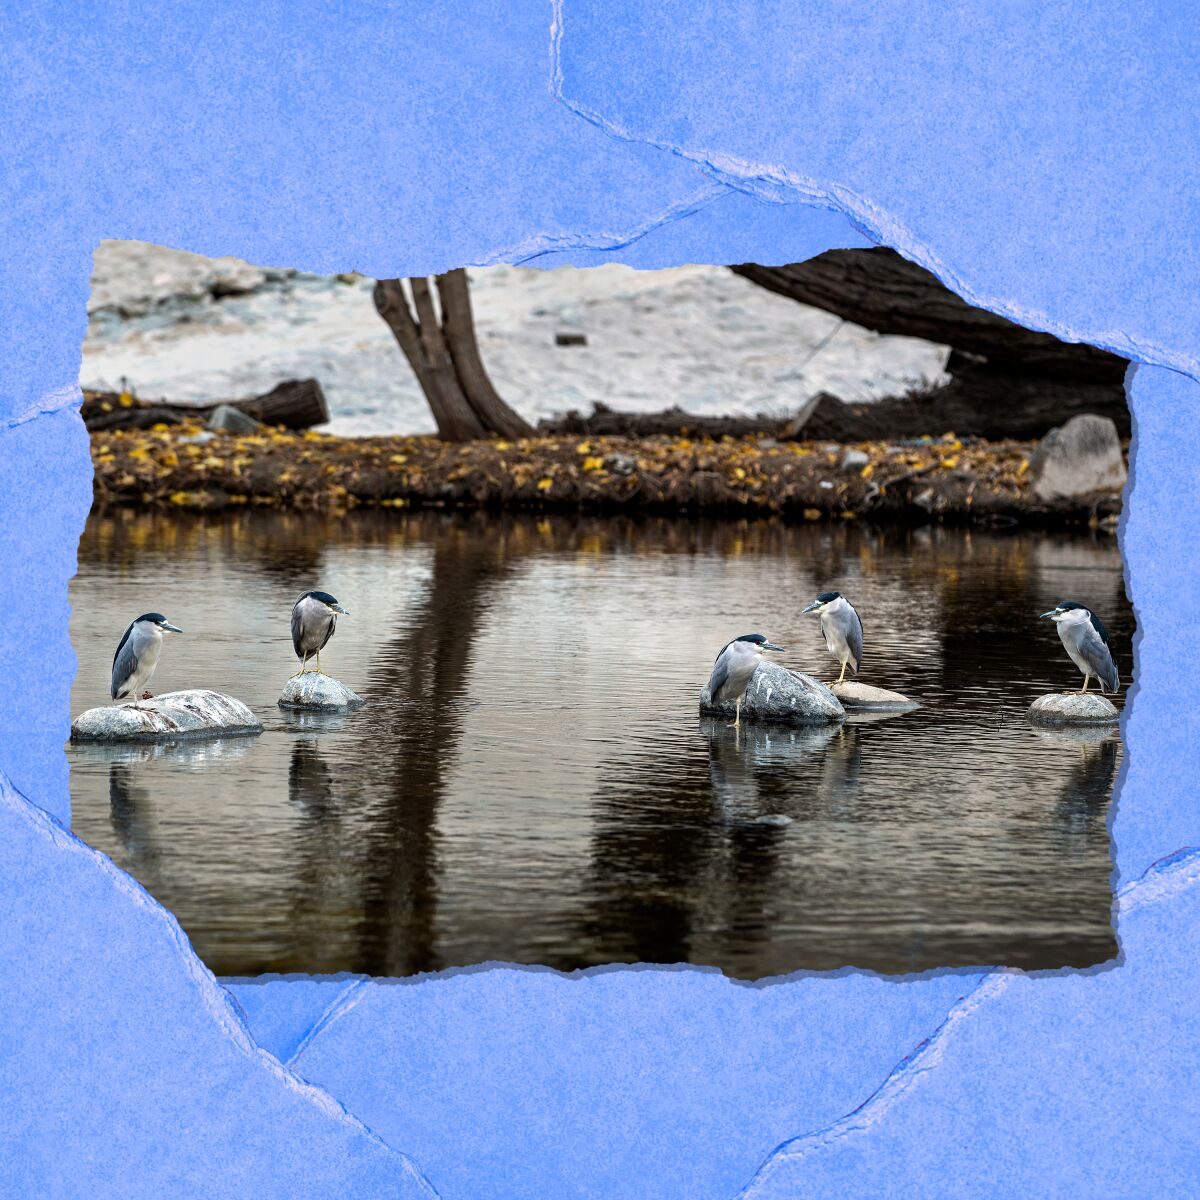 Birds stand on rocks in a shallow waterway.